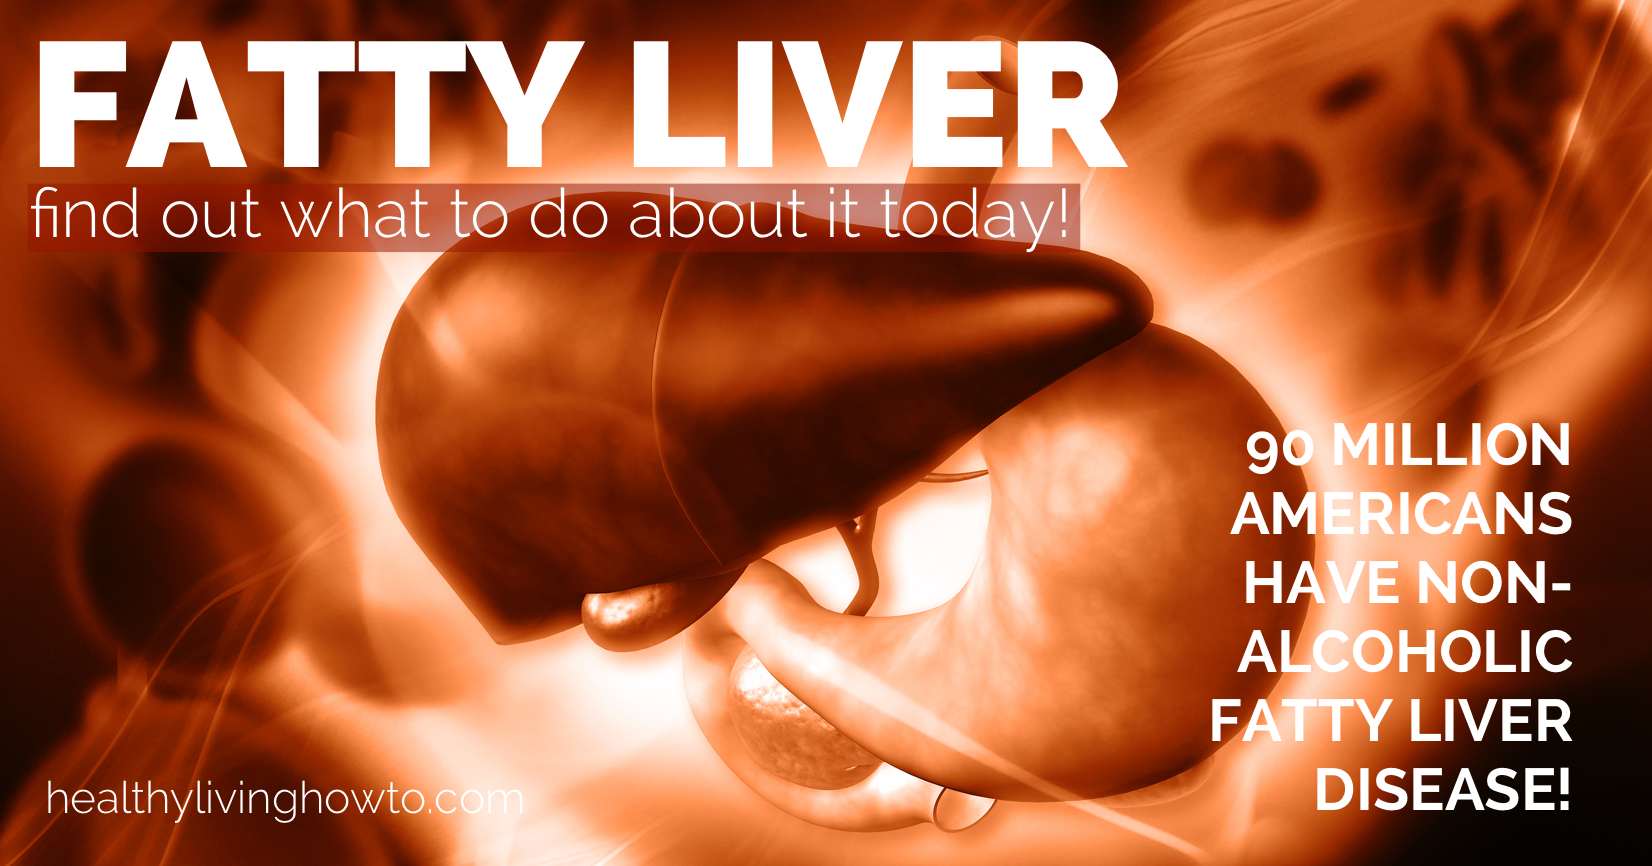 What To Do About Fatty Liver Disease | healthylivinghowto.com